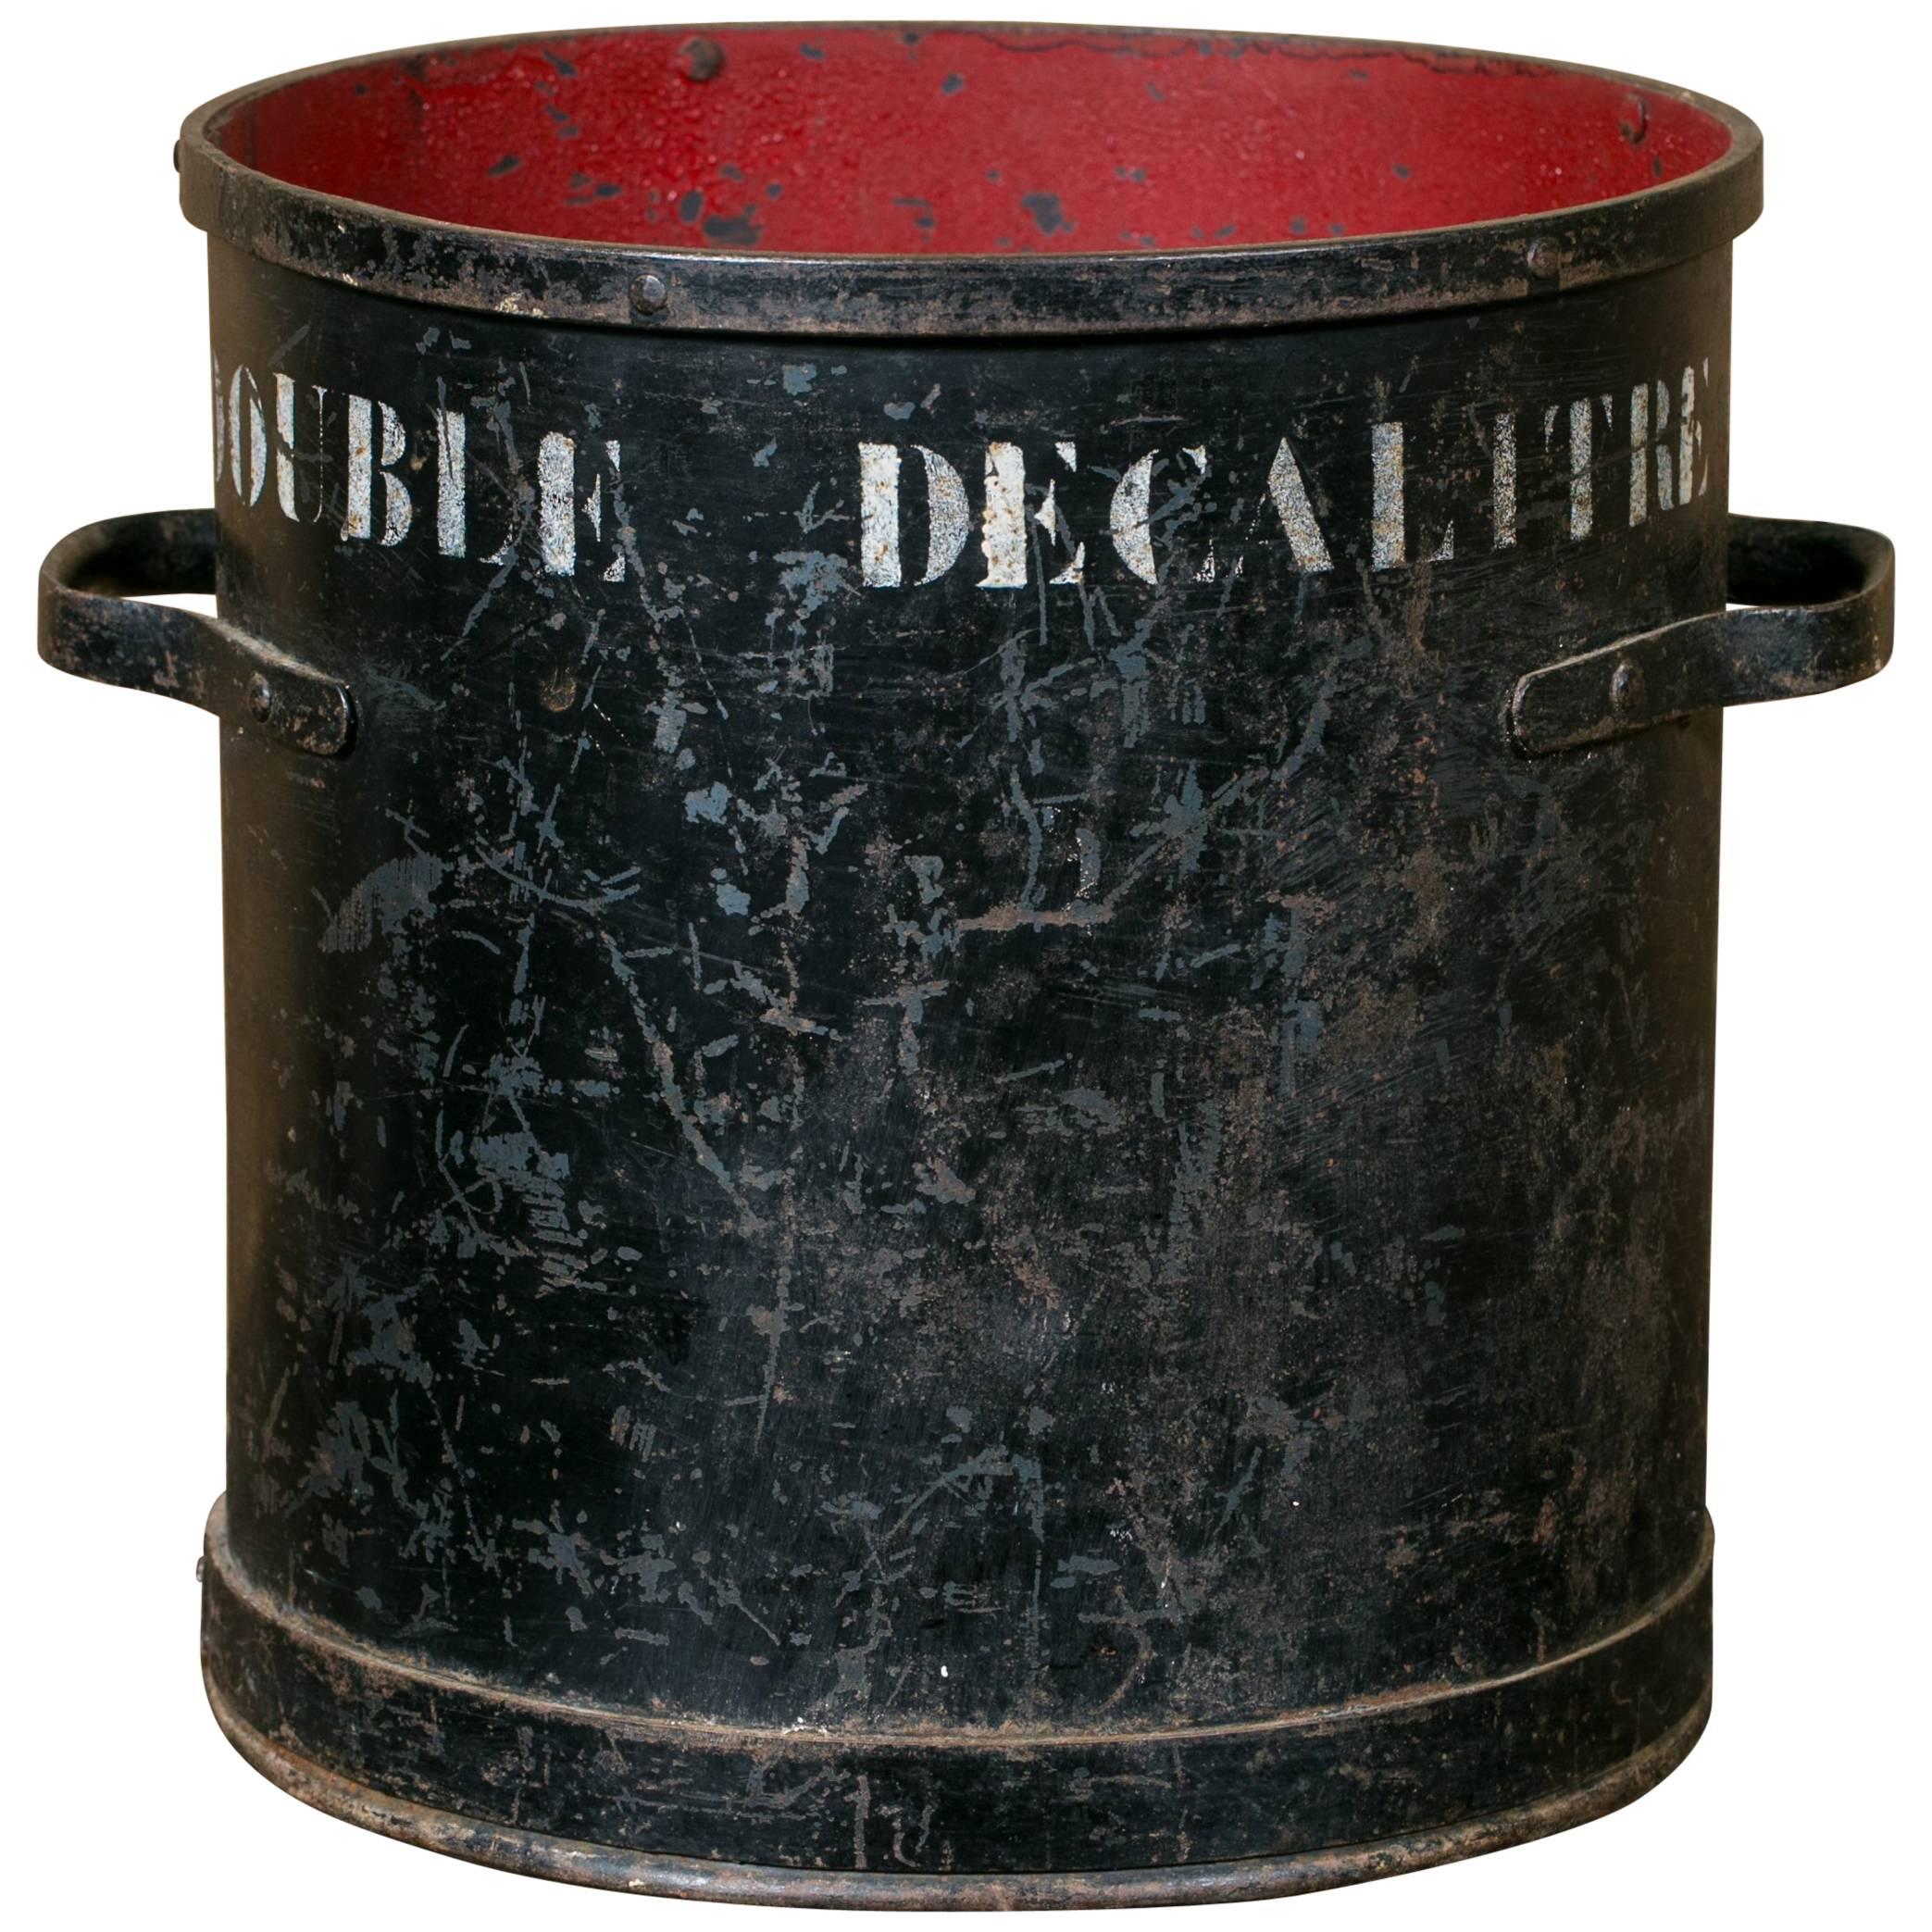 Vintage Large Red and Black Double Decalitre Measure from Belgium, circa 1940